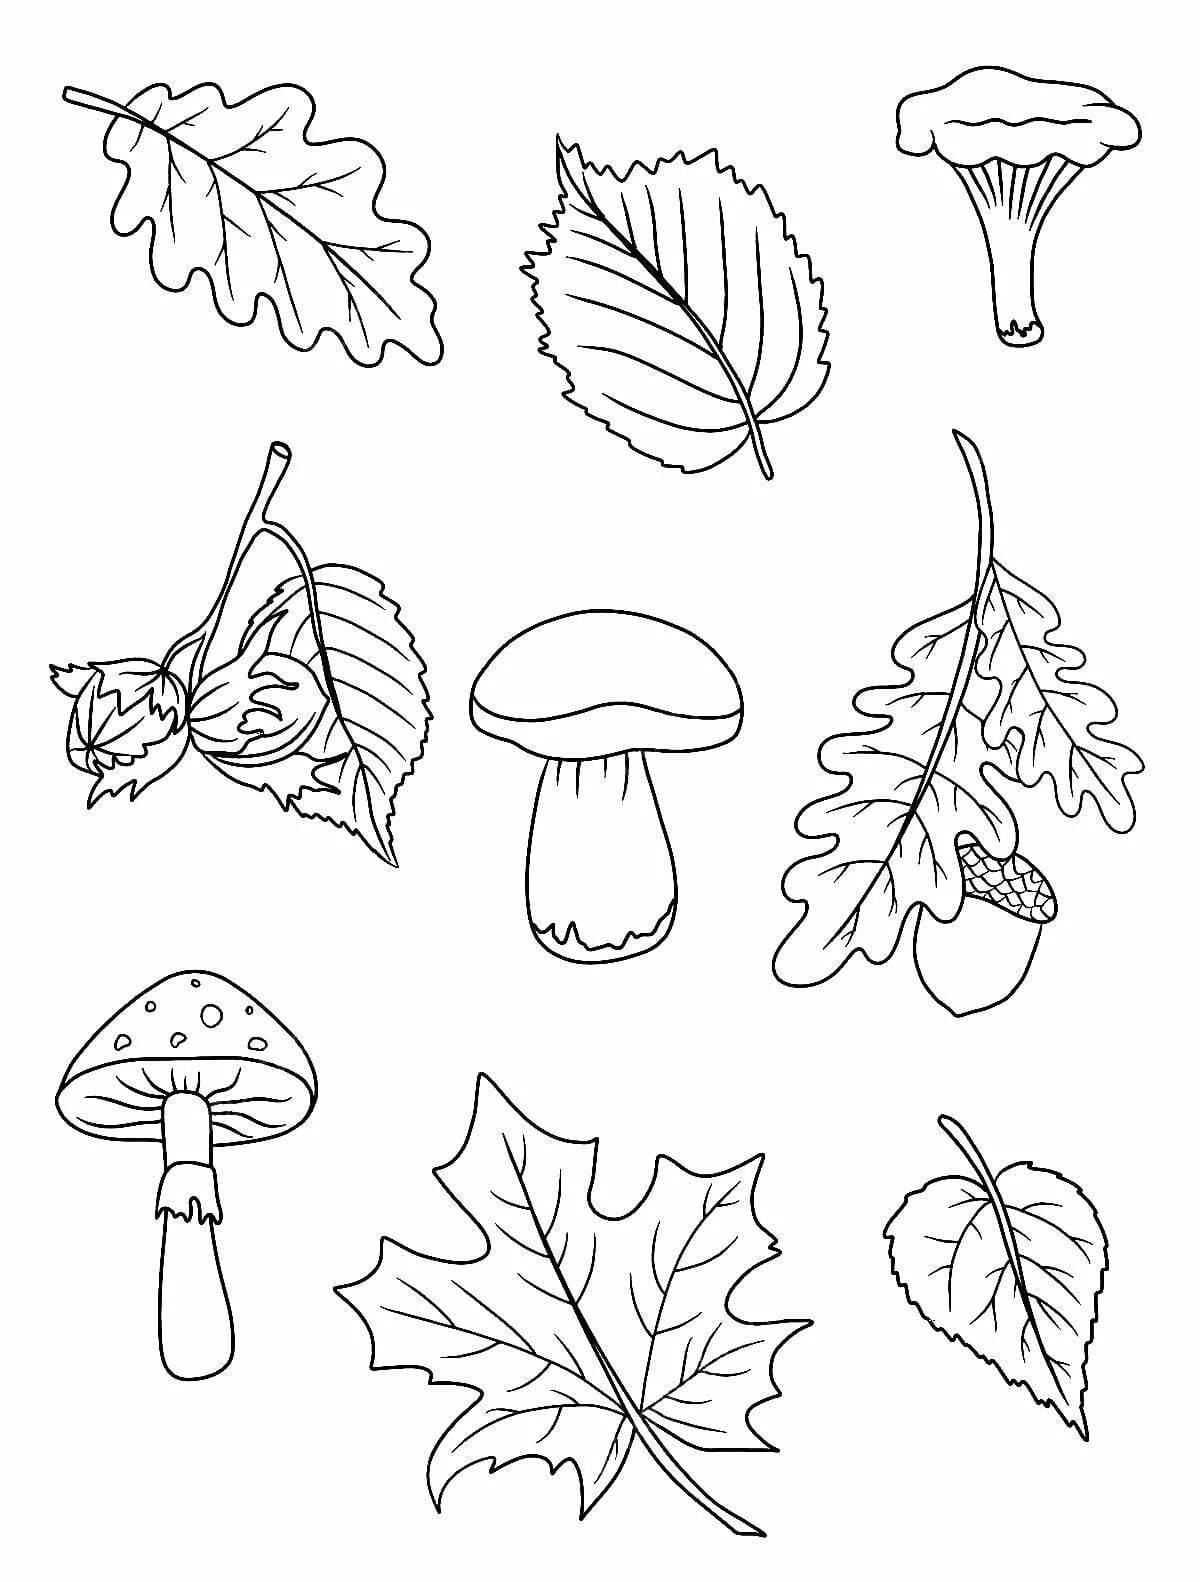 Impressive autumn coloring book for 3-4 year olds